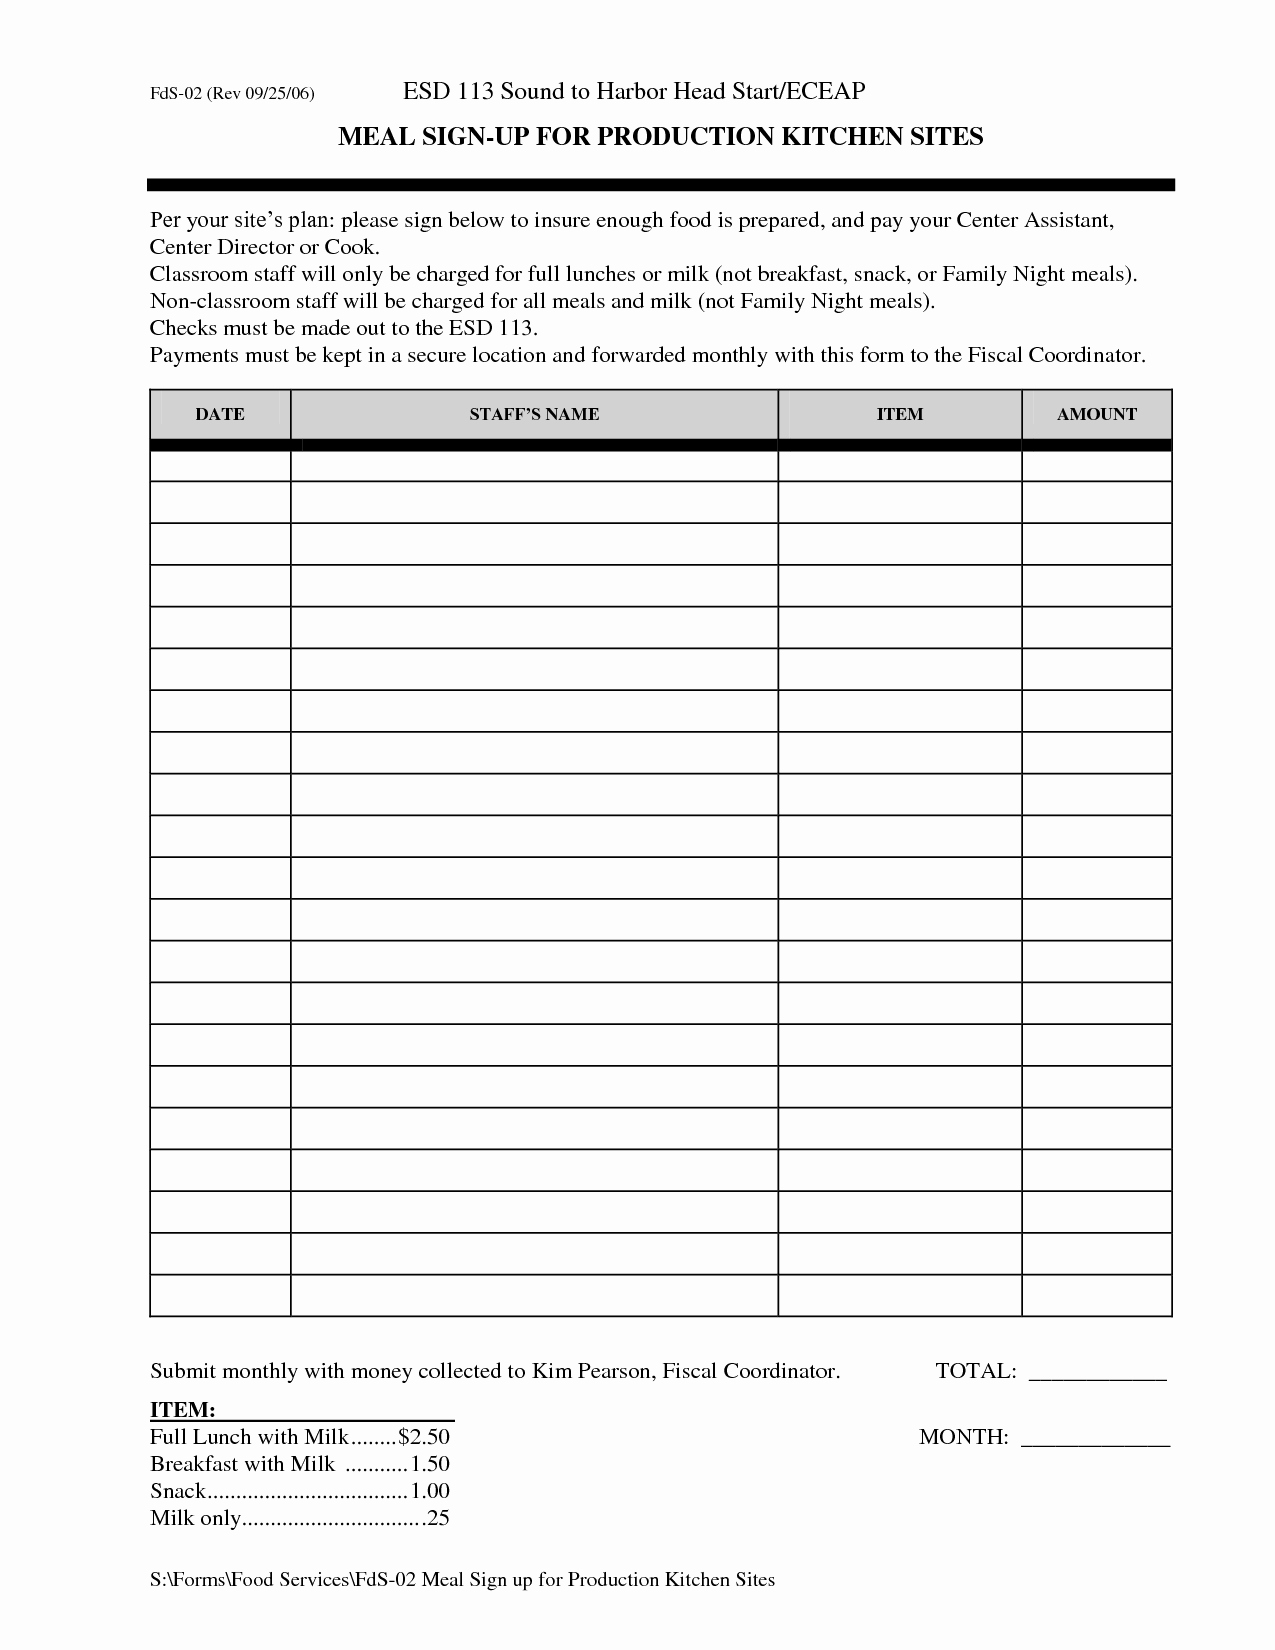 meal sign up sheet template